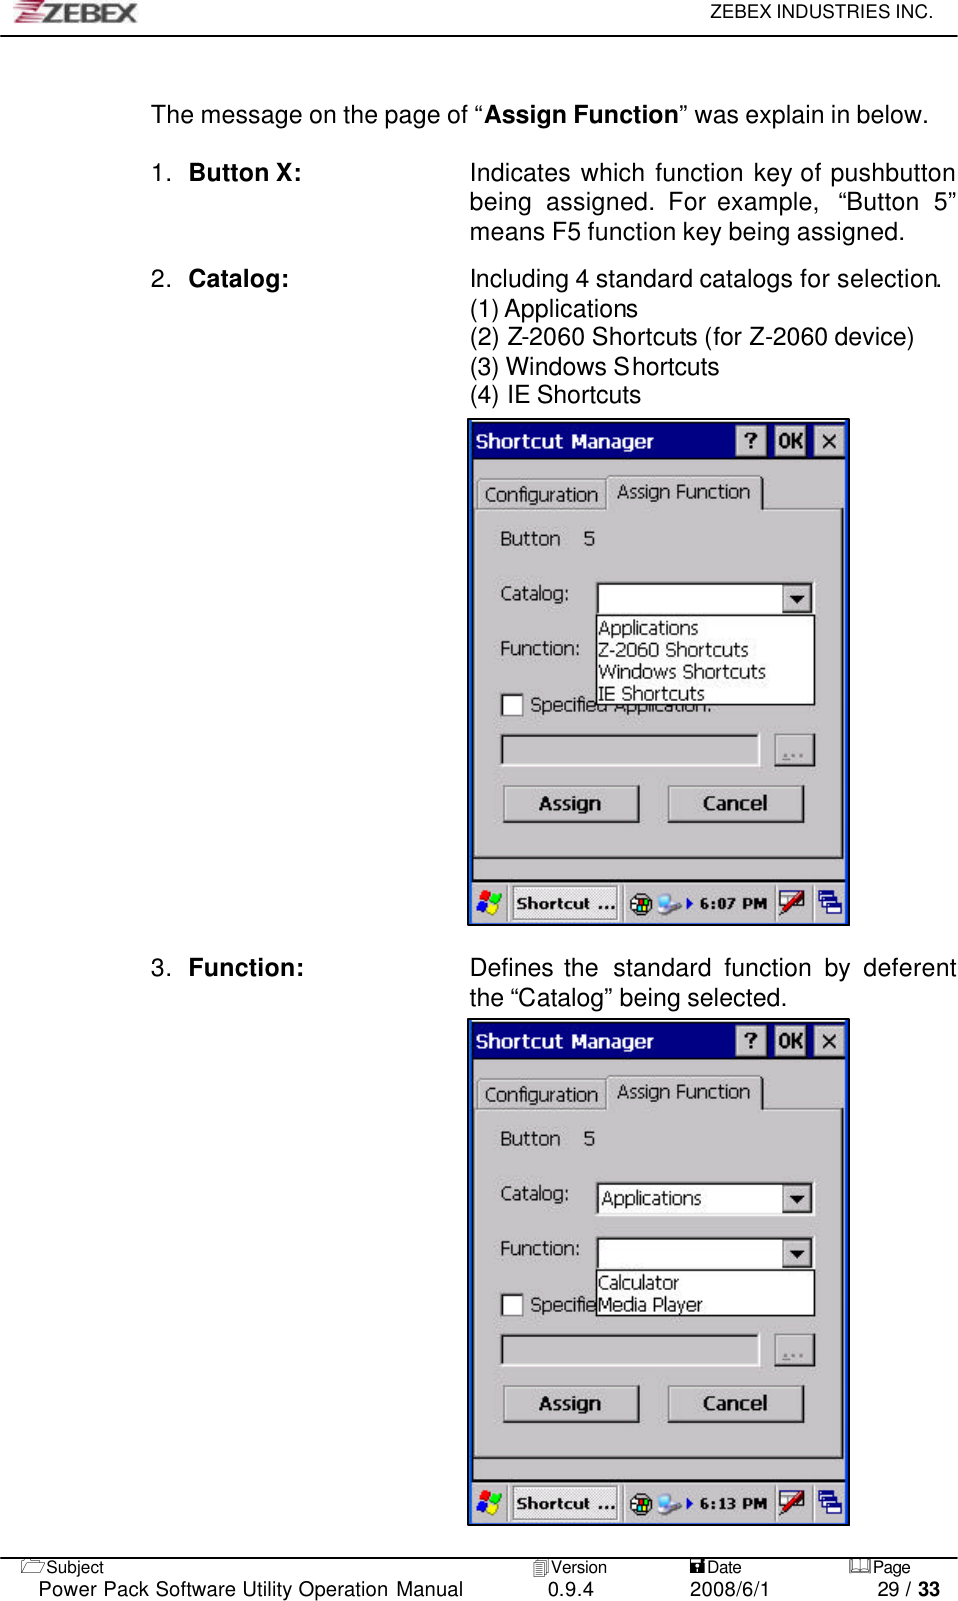     ZEBEX INDUSTRIES INC.   1Subject 4Version           =Date &amp;Page  Power Pack Software Utility Operation Manual 0.9.4    2008/6/1          29 / 33  The message on the page of “Assign Function” was explain in below.  1. Button X:  Indicates which function key of pushbutton being assigned. For example,  “Button 5” means F5 function key being assigned.  2. Catalog: Including 4 standard catalogs for selection.   (1) Applications (2) Z-2060 Shortcuts (for Z-2060 device) (3) Windows Shortcuts   (4) IE Shortcuts                    3. Function:    Defines the  standard function by deferent the “Catalog” being selected.                   